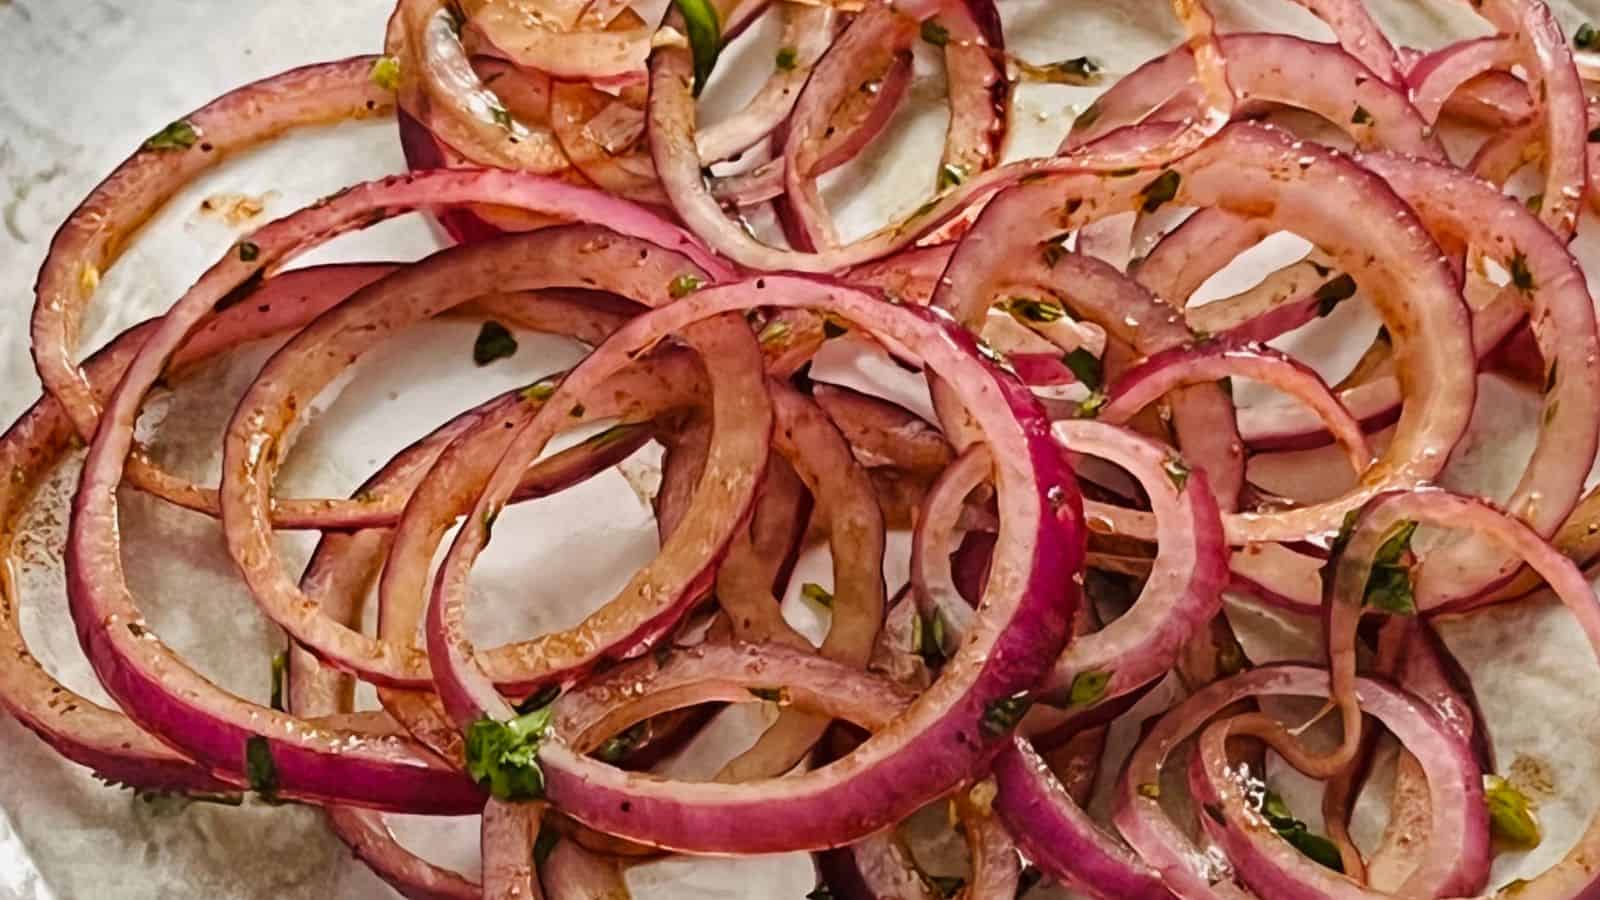 Close-up of thinly sliced red onions, marinated with herbs and spices, placed on a white plate.